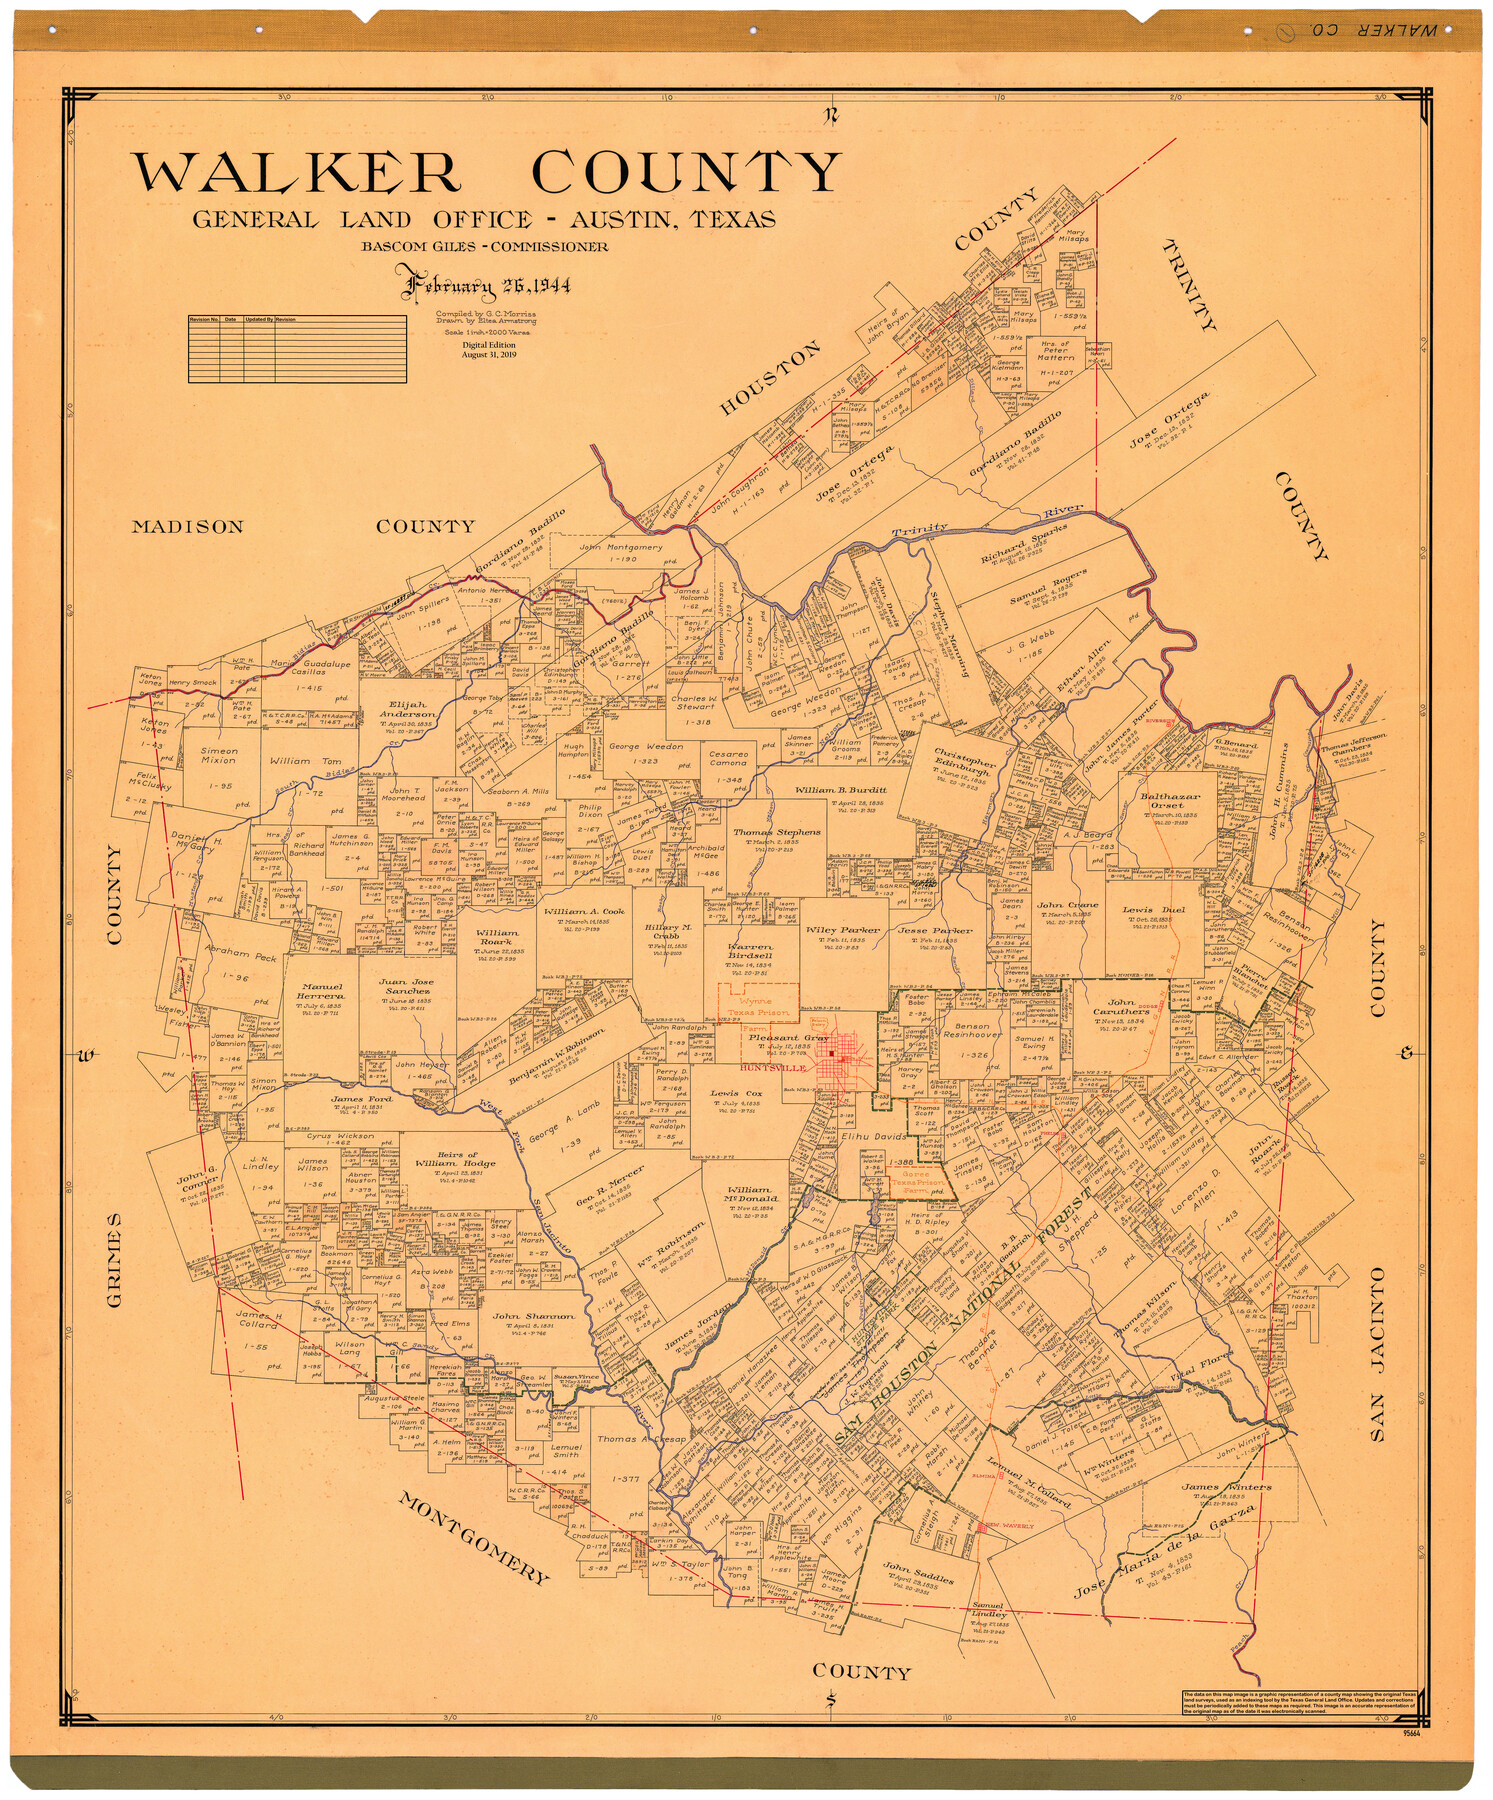 95664, Walker County, General Map Collection